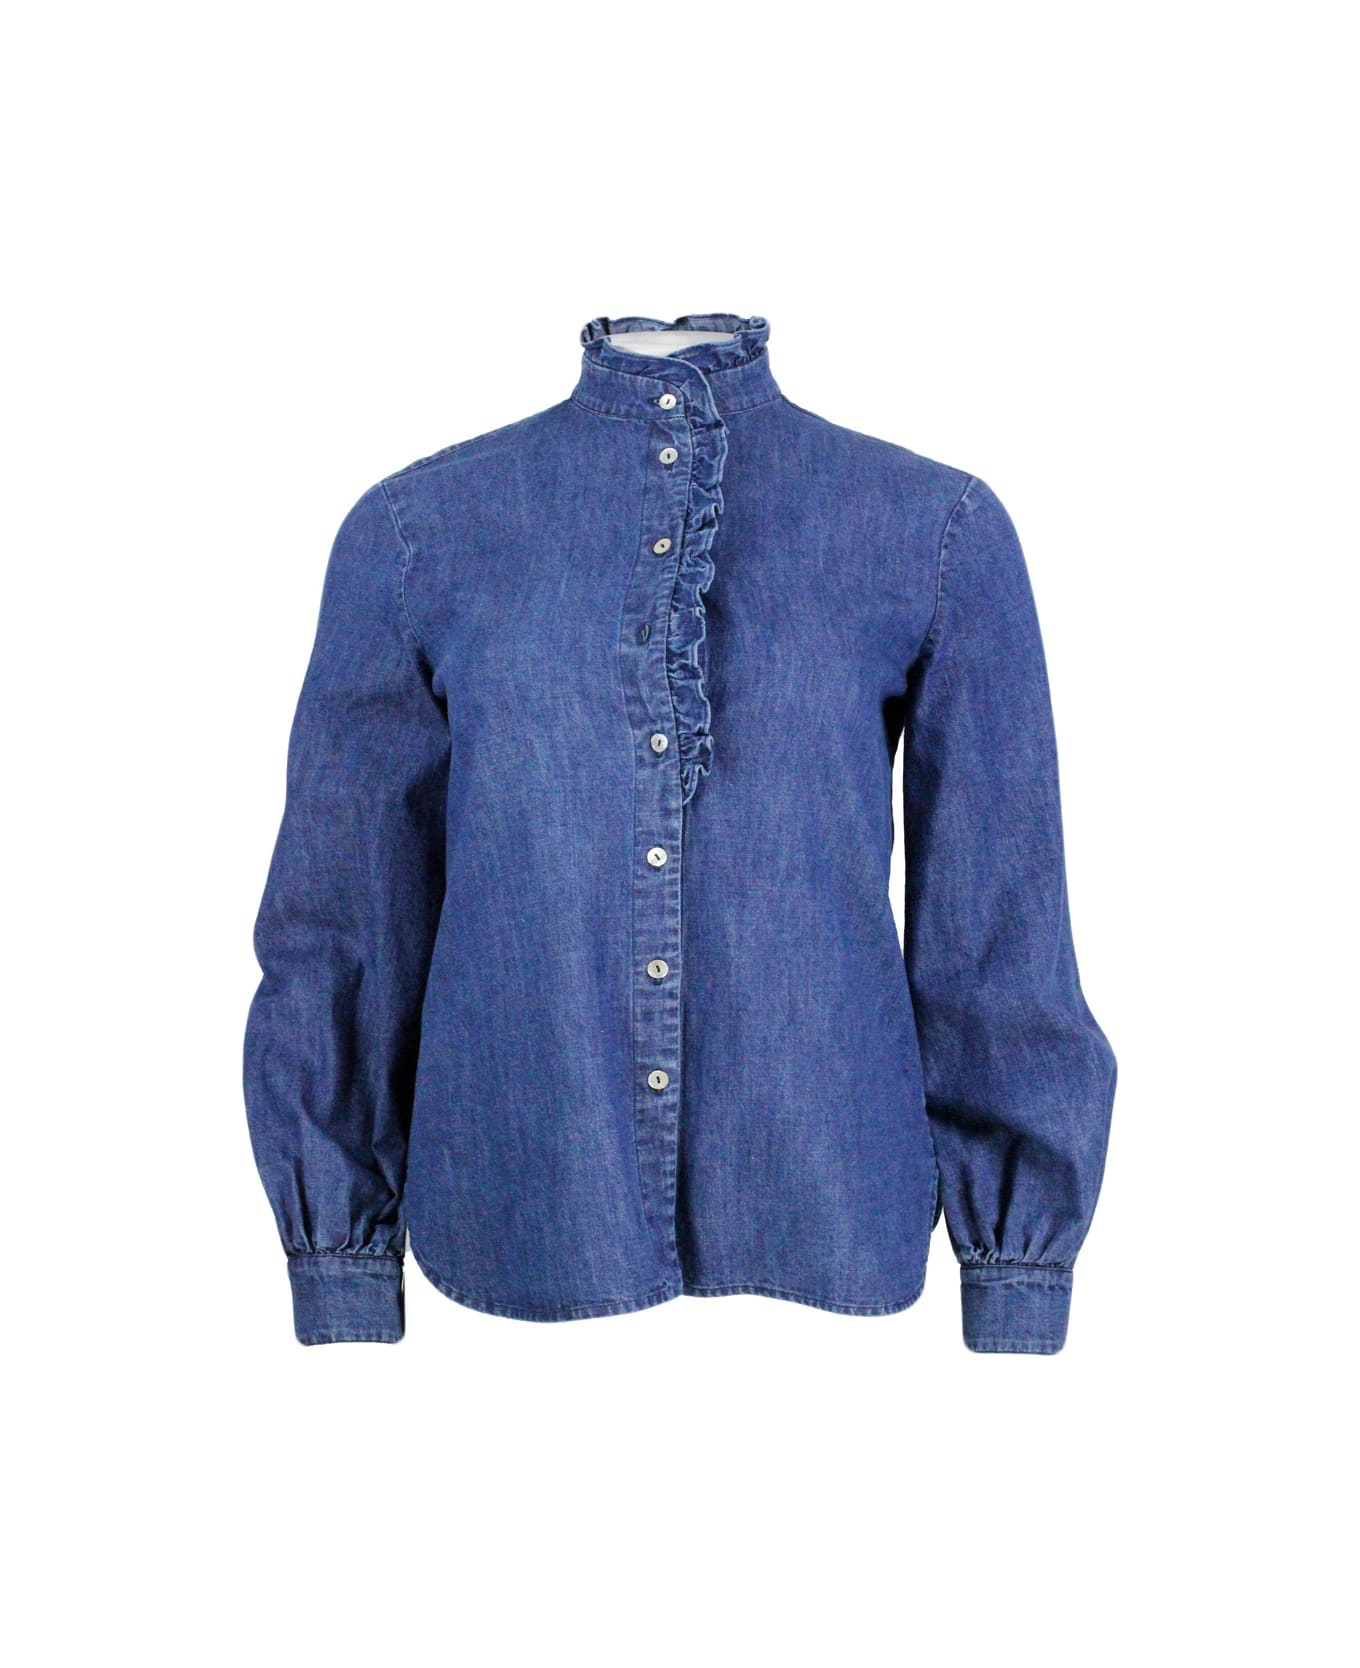 Barba Napoli Long-sleeved Shirt In Fine Denim Embellished With Rouges On The Collar And Along The Buttons. Regular Line - Denim